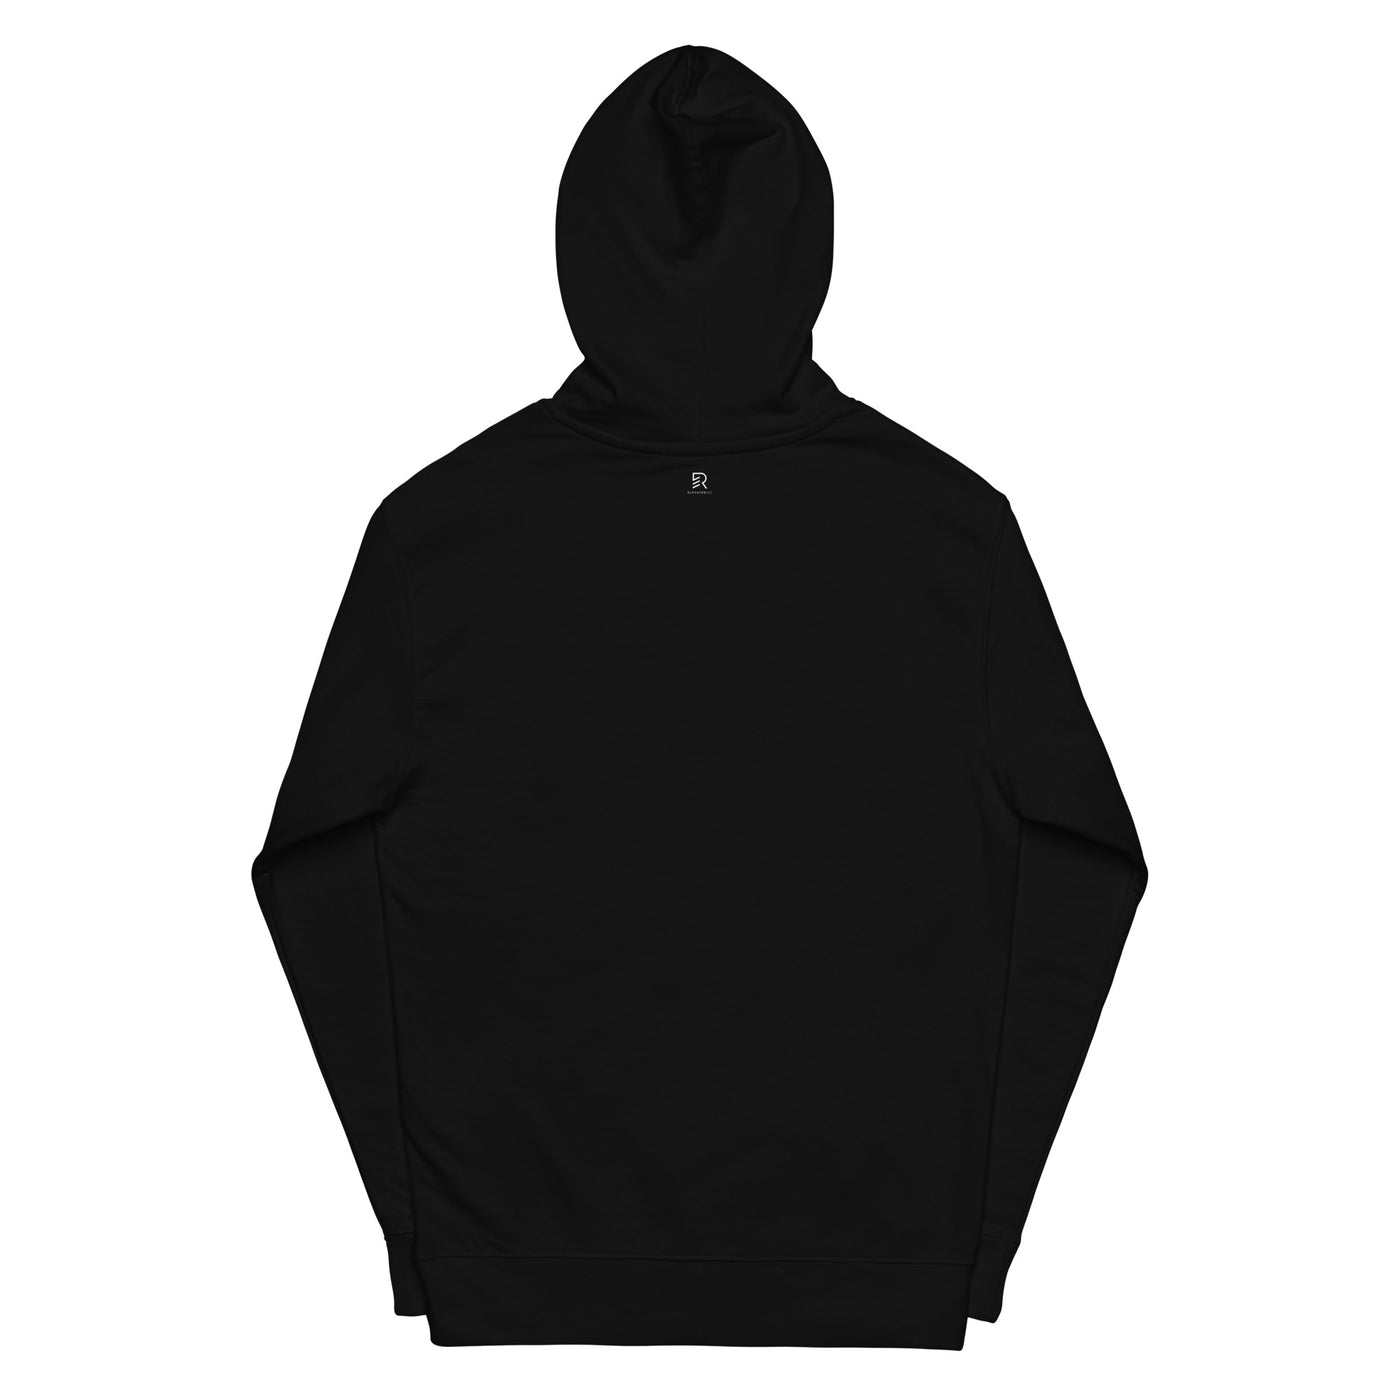 Women's Midweight Embroidered Black Hoodie - Focus and Relax